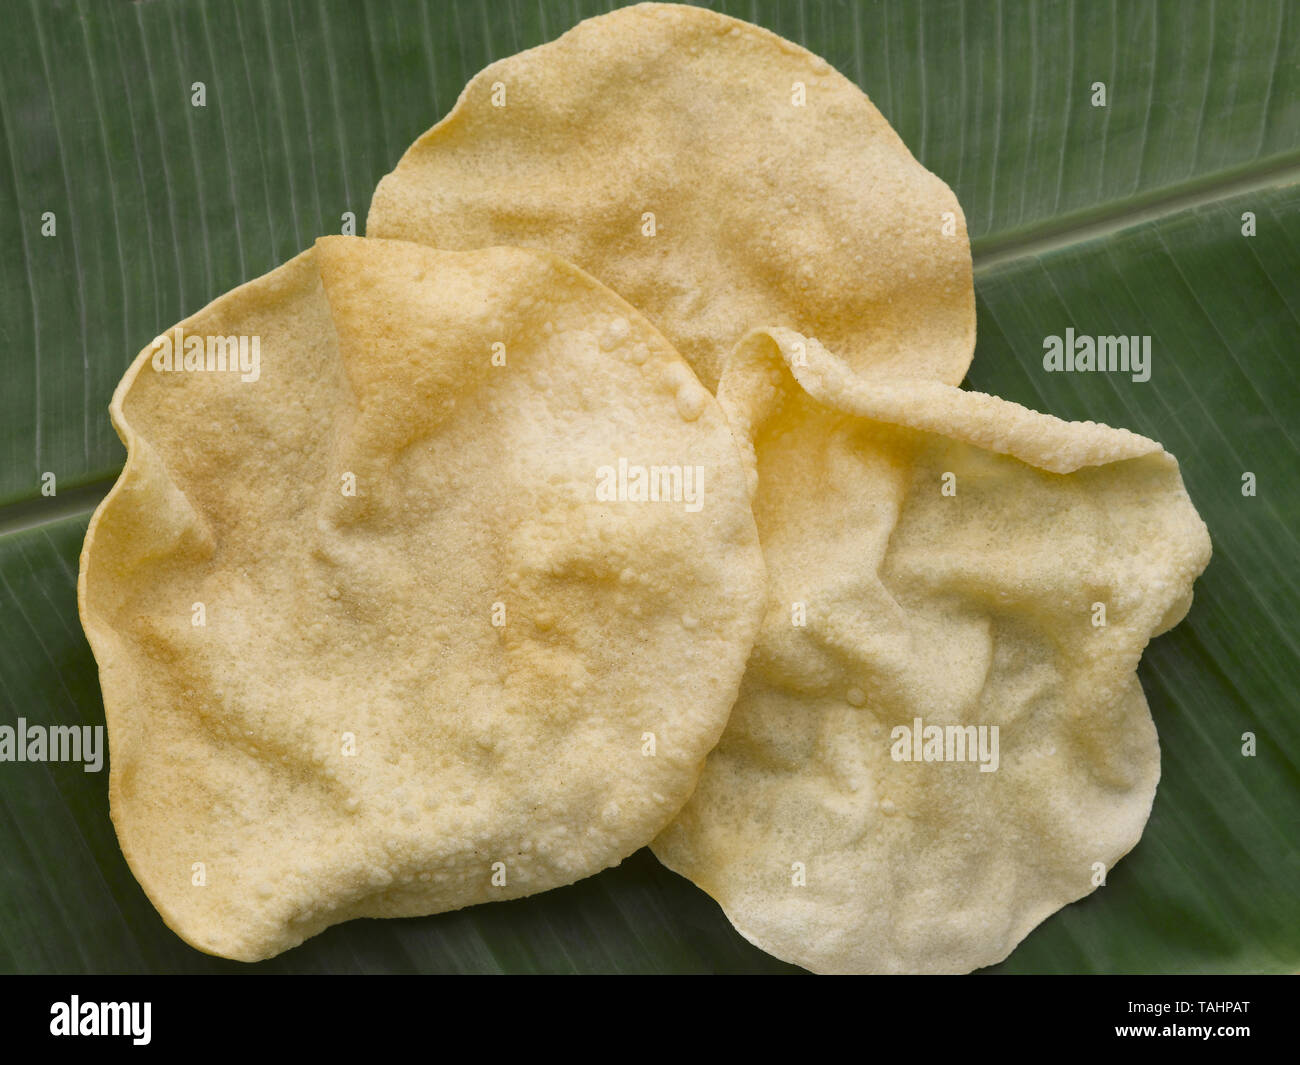 PAPPADDAM- SERVED IN A  TRADITIONAL TAMIL LUNCH ON  A GREEN PLANTAIN LEAF Stock Photo